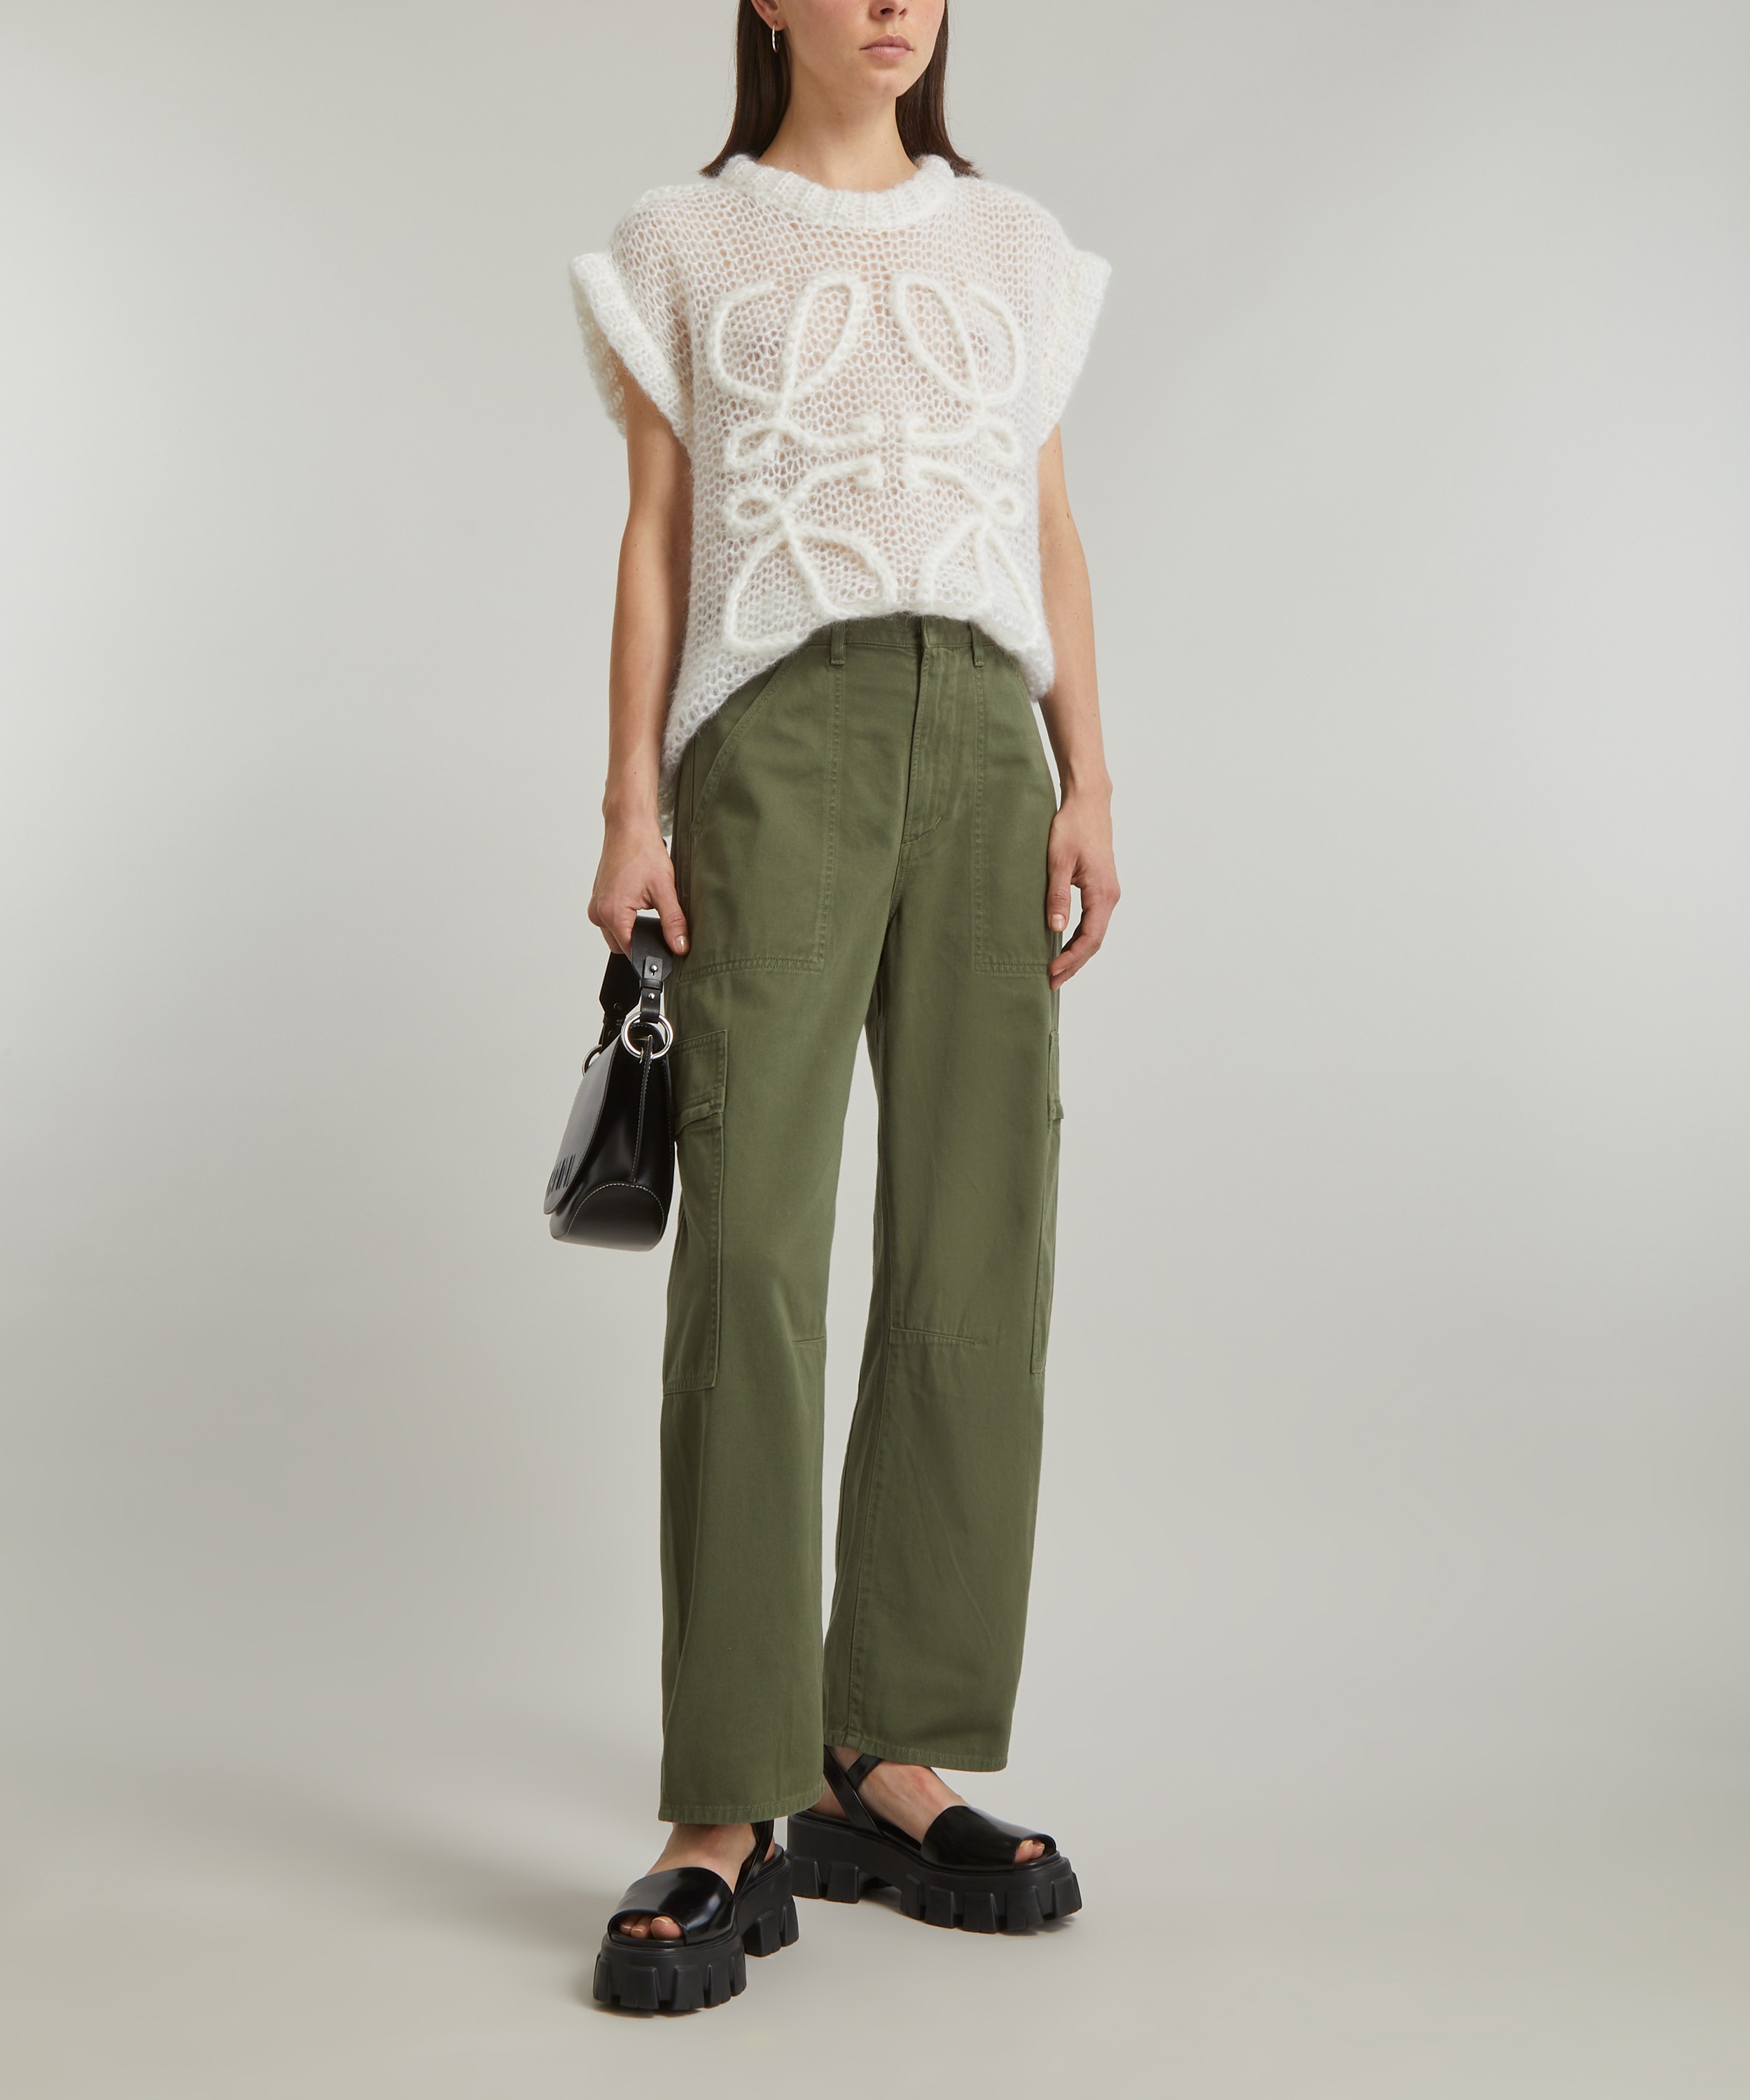 Citizens of Cargo Slung Liberty Trousers | Humanity Marcelle Low